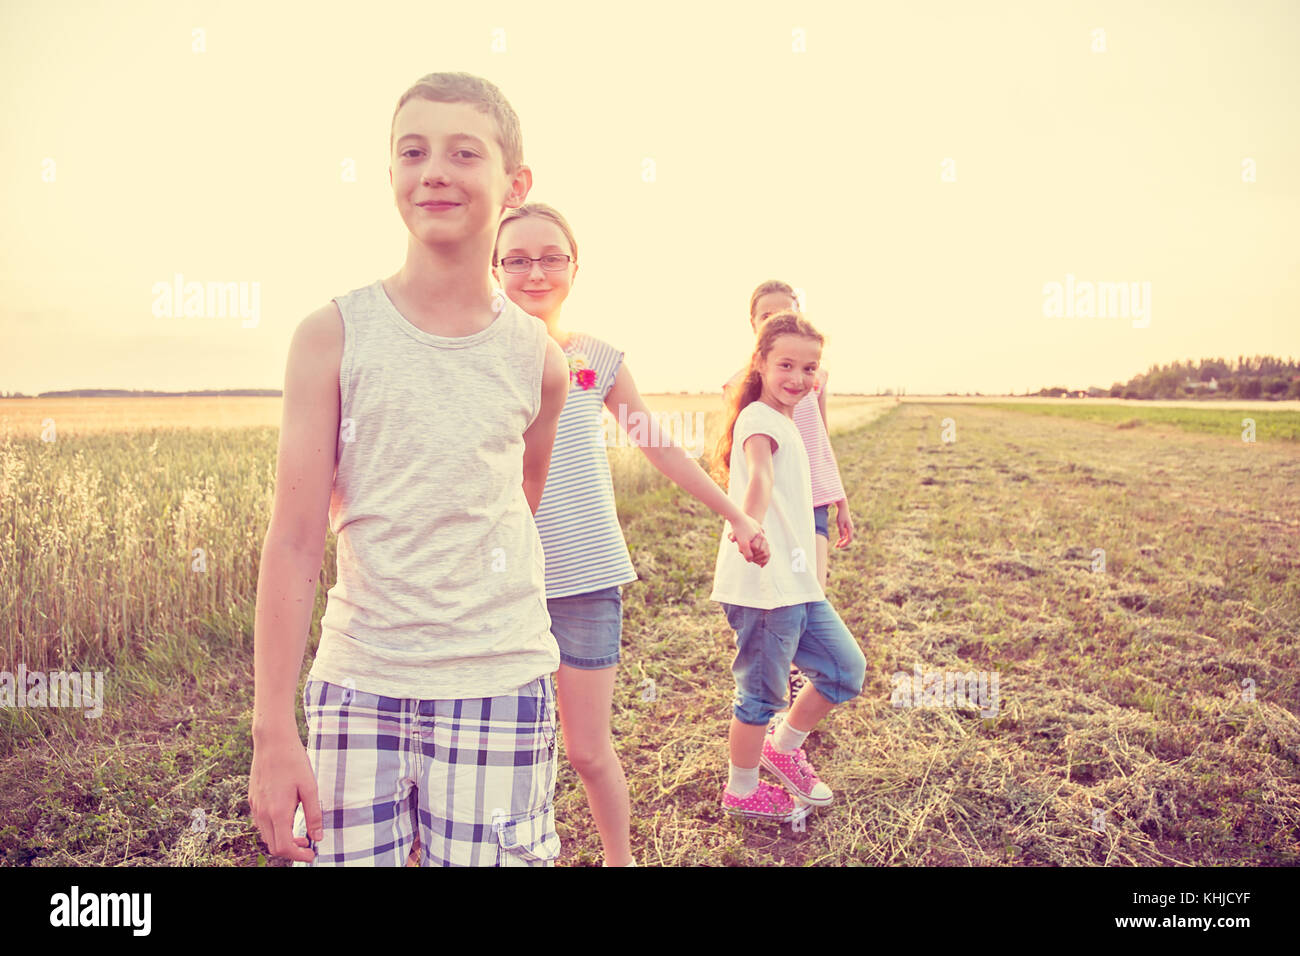 Four young caucasian kids holding hands, walking at cultivated countryside field, at summer sunset, wearing casual summer clothes Stock Photo